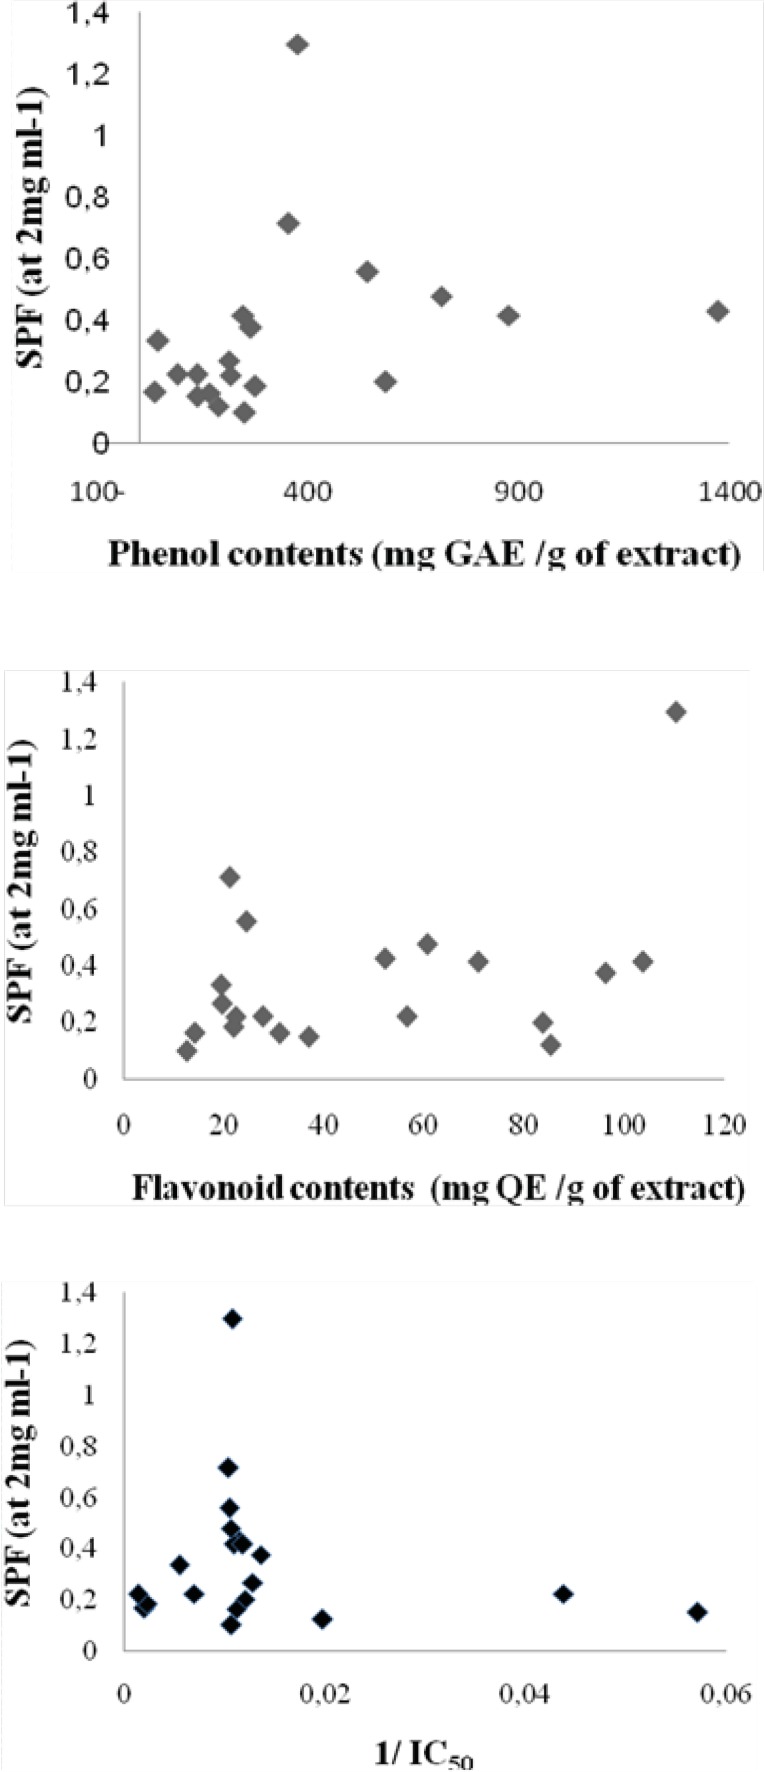 Correlation between SPF and phenolic contents (upper), flavonoid contents (middle) and antioxidant activity (by DPPH test)(lower).